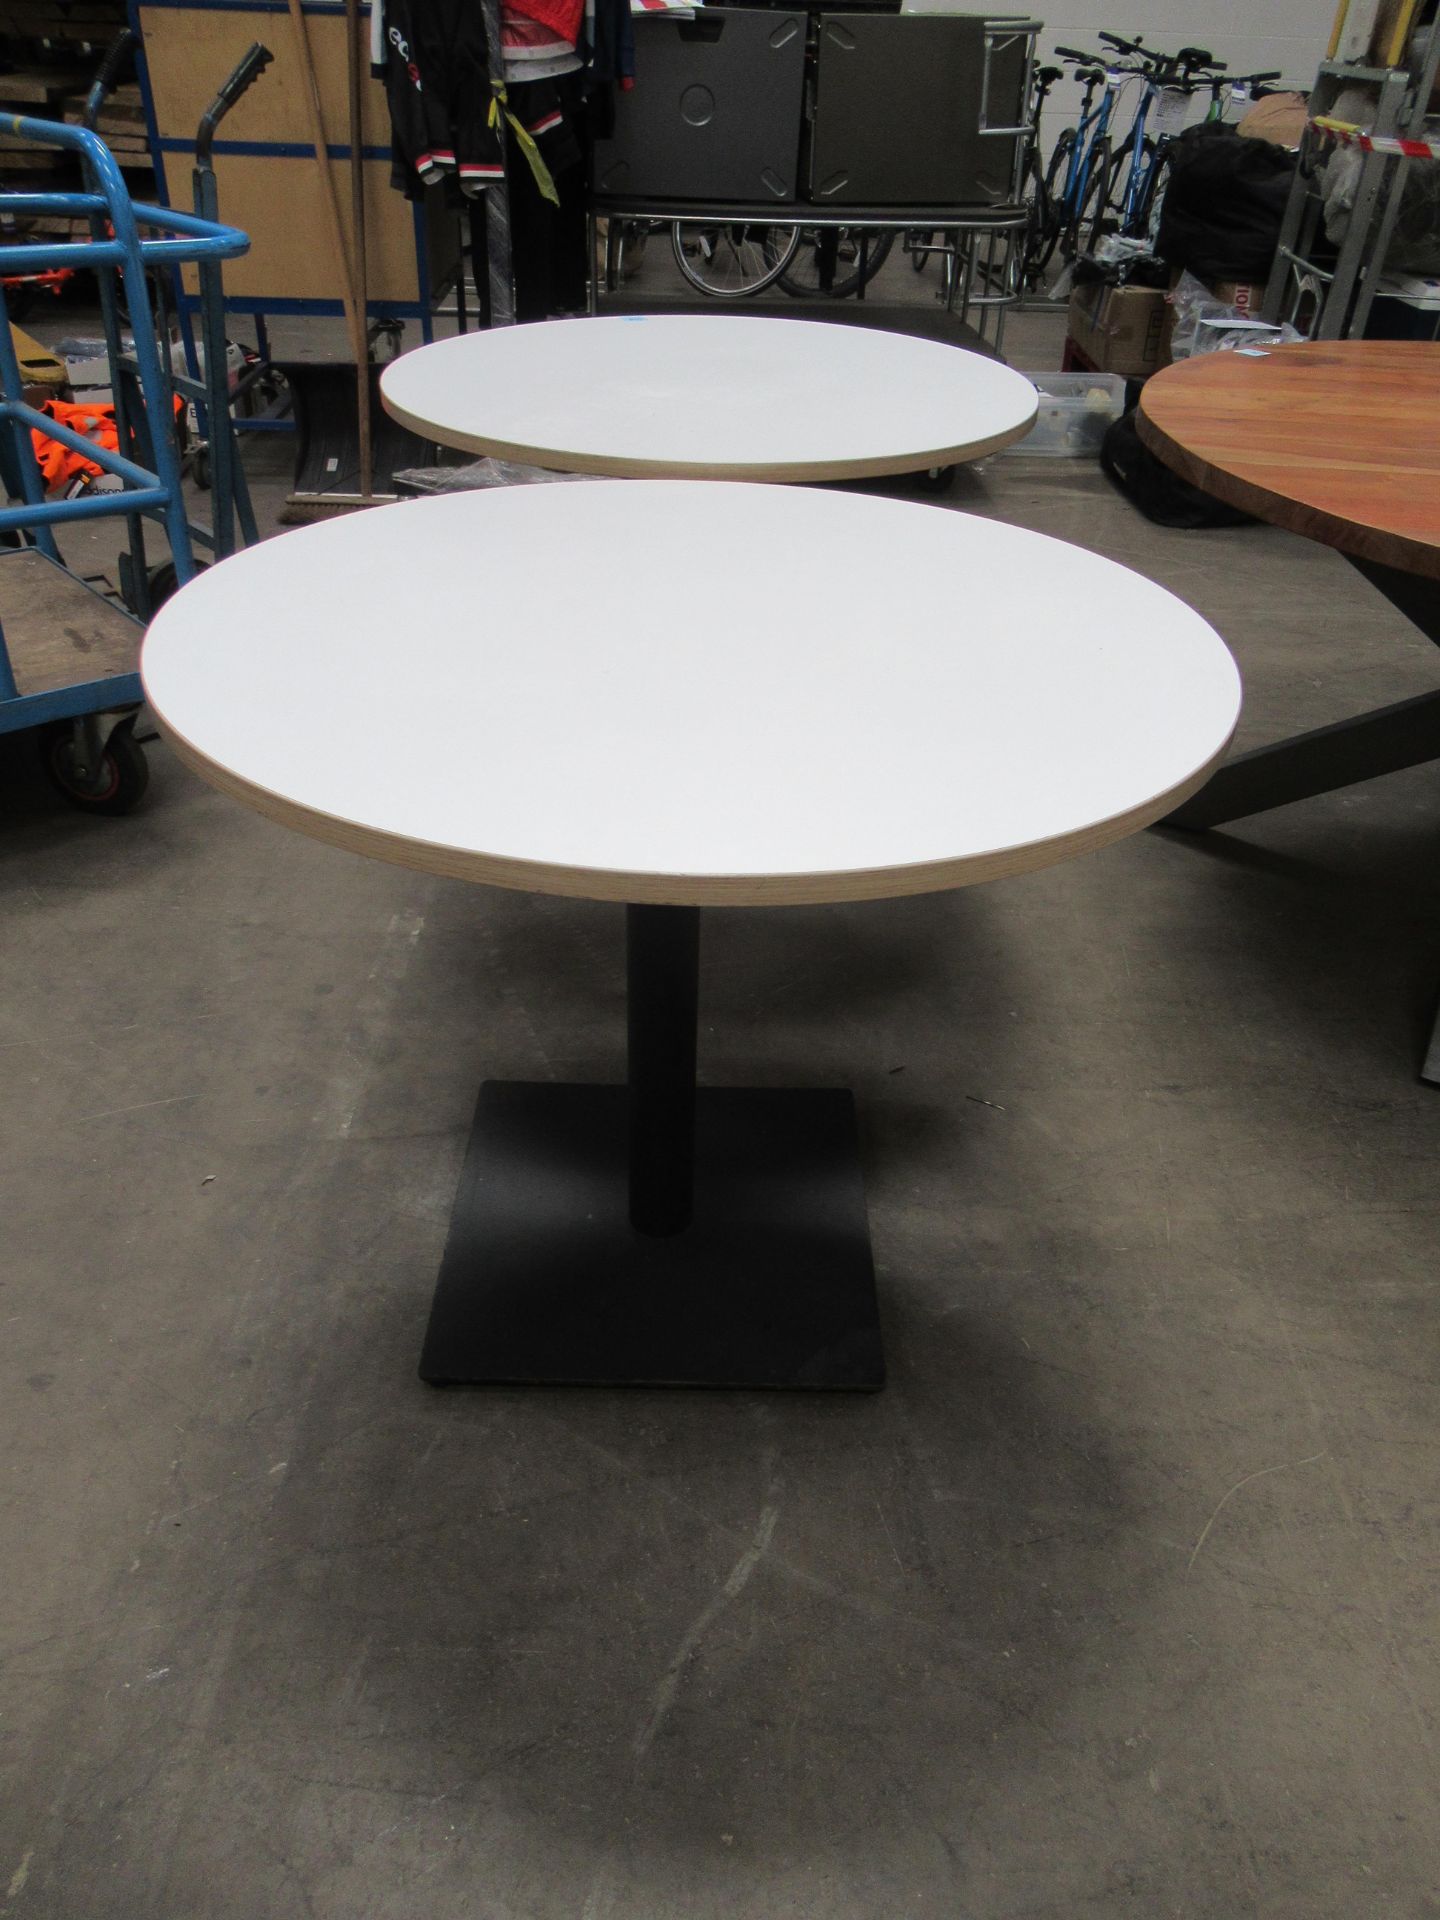 2x Round Top Tables - Image 3 of 4